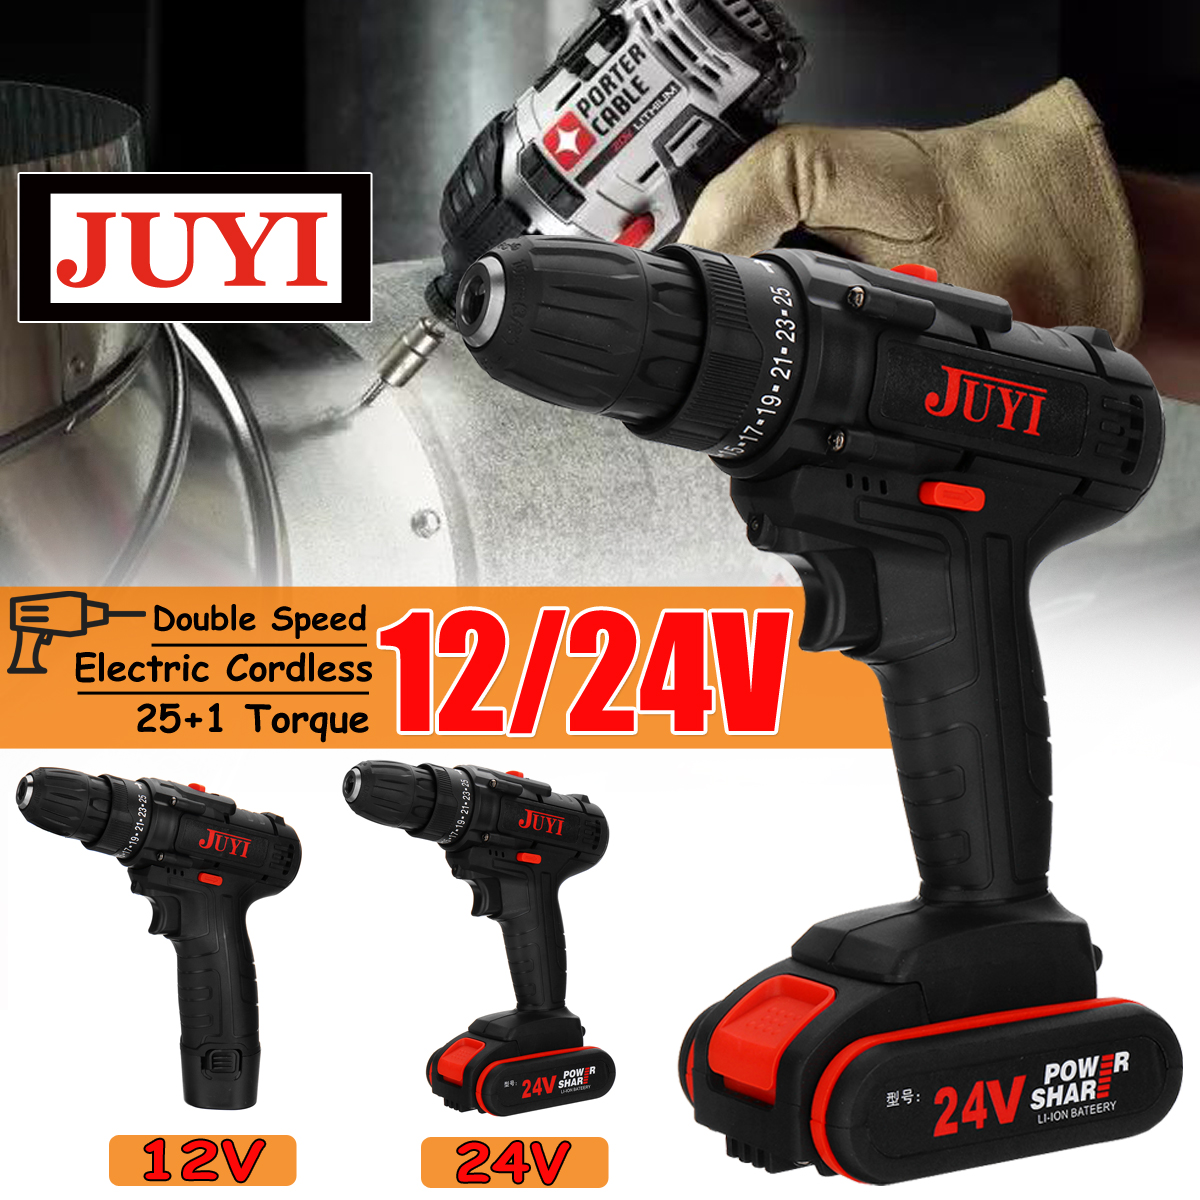 JUYI-12V24V-Lithium-Battery-Power-Drill-Cordless-Rechargeable-2-Speed-Electric-Driver-Drill-Motor-Re-1557976-1